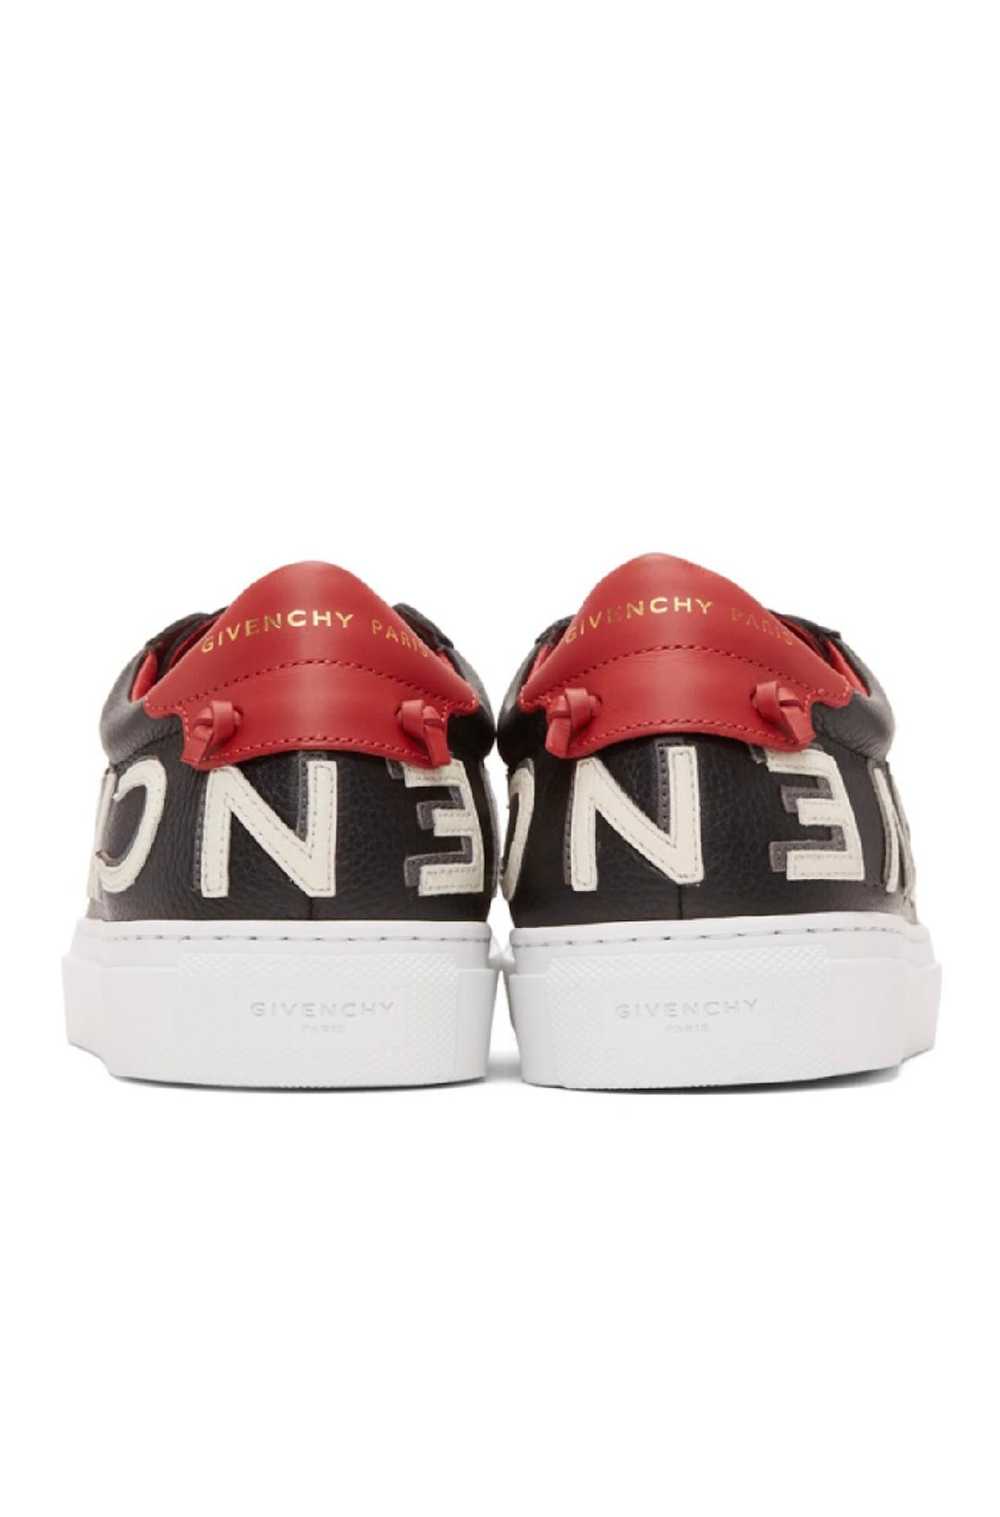 Givenchy Givenchy Urban Knot Street Low Sneaker - image 3